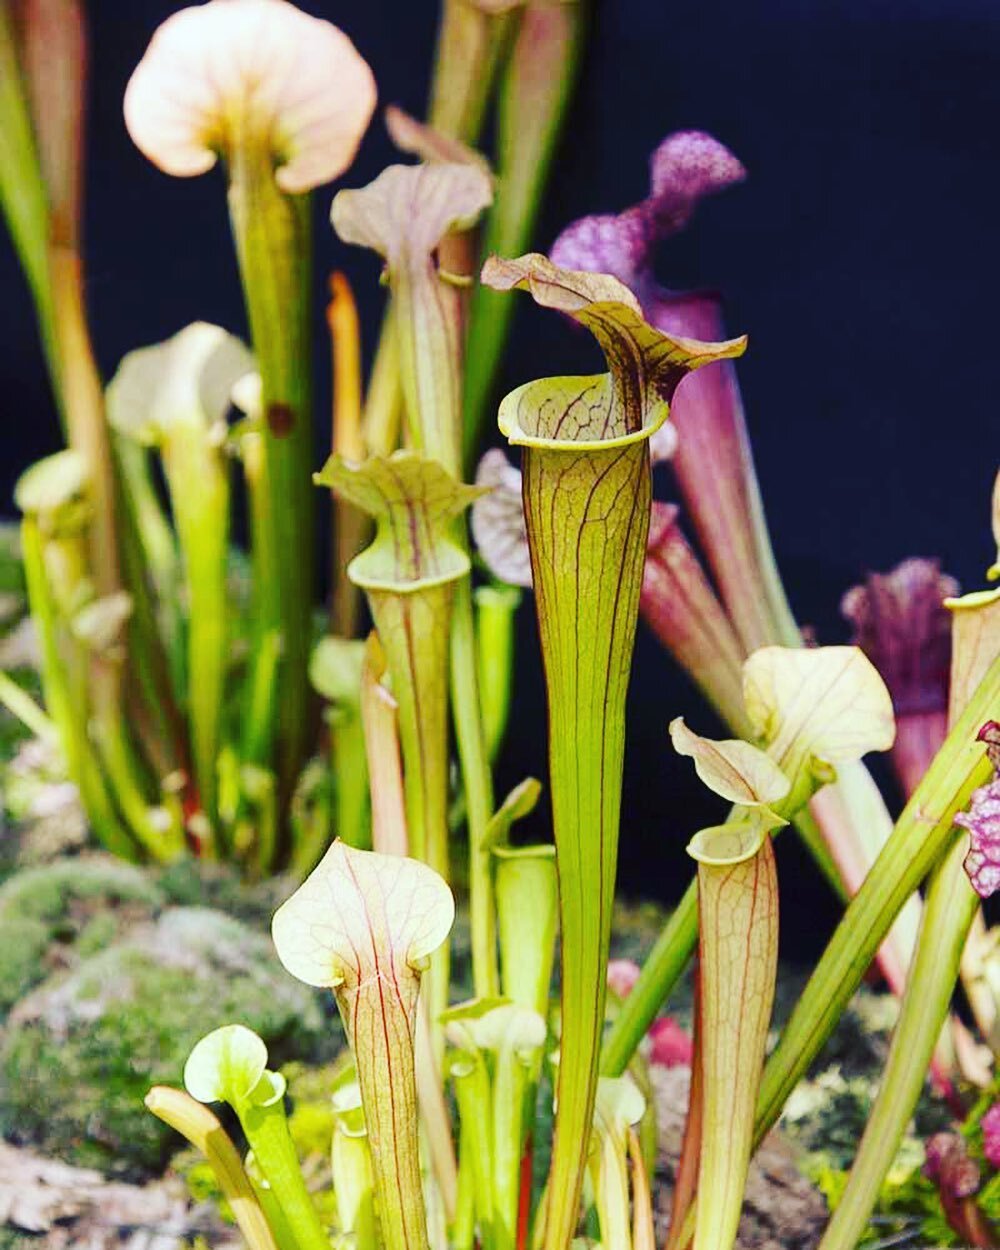 Interested in carnivorous plants? So are we! Come see the collection in our Tropicals room. 

#mossyfern #allthingsplants